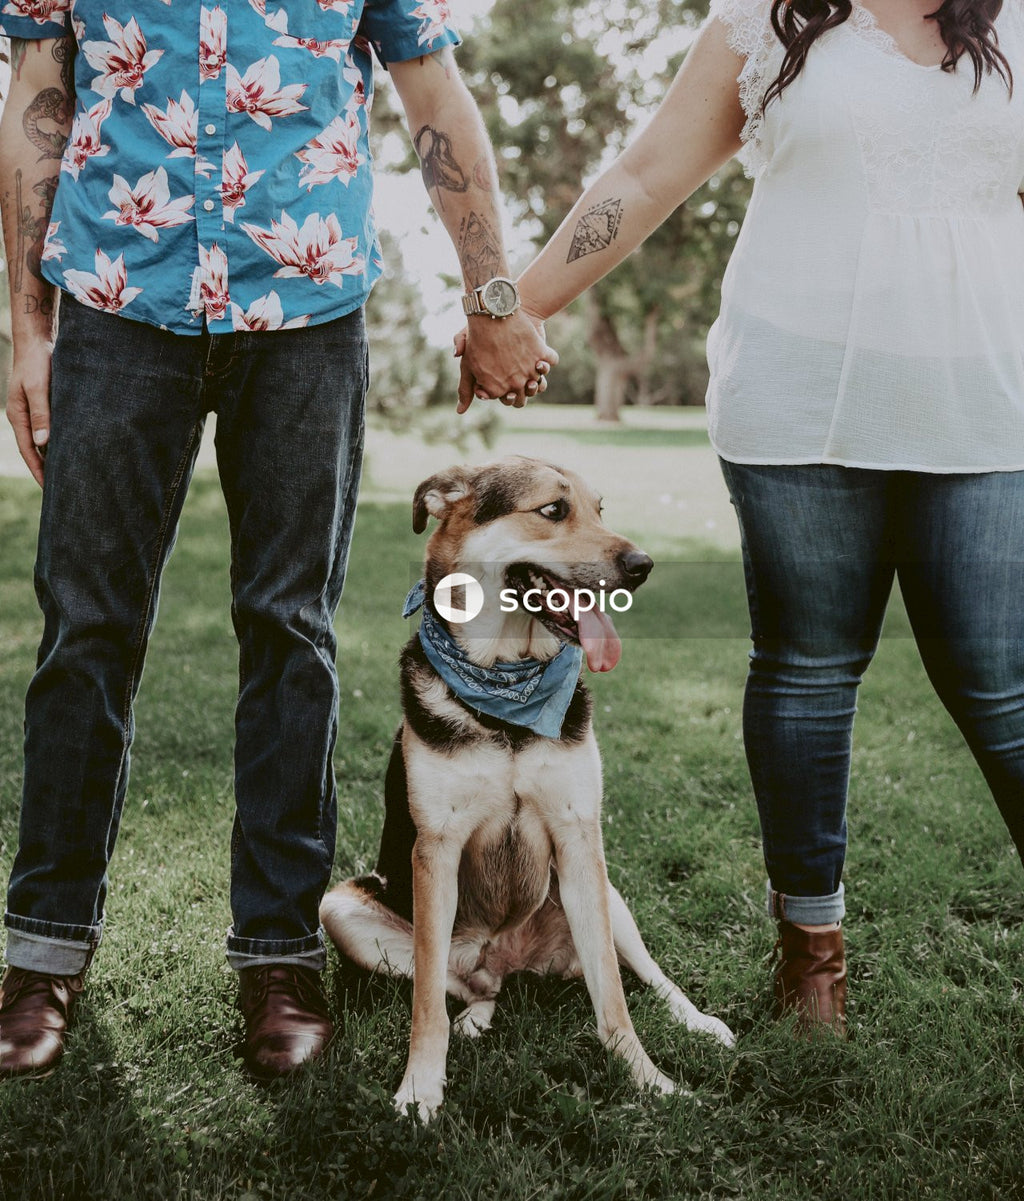 Man and woman holding hands while dog standing between them